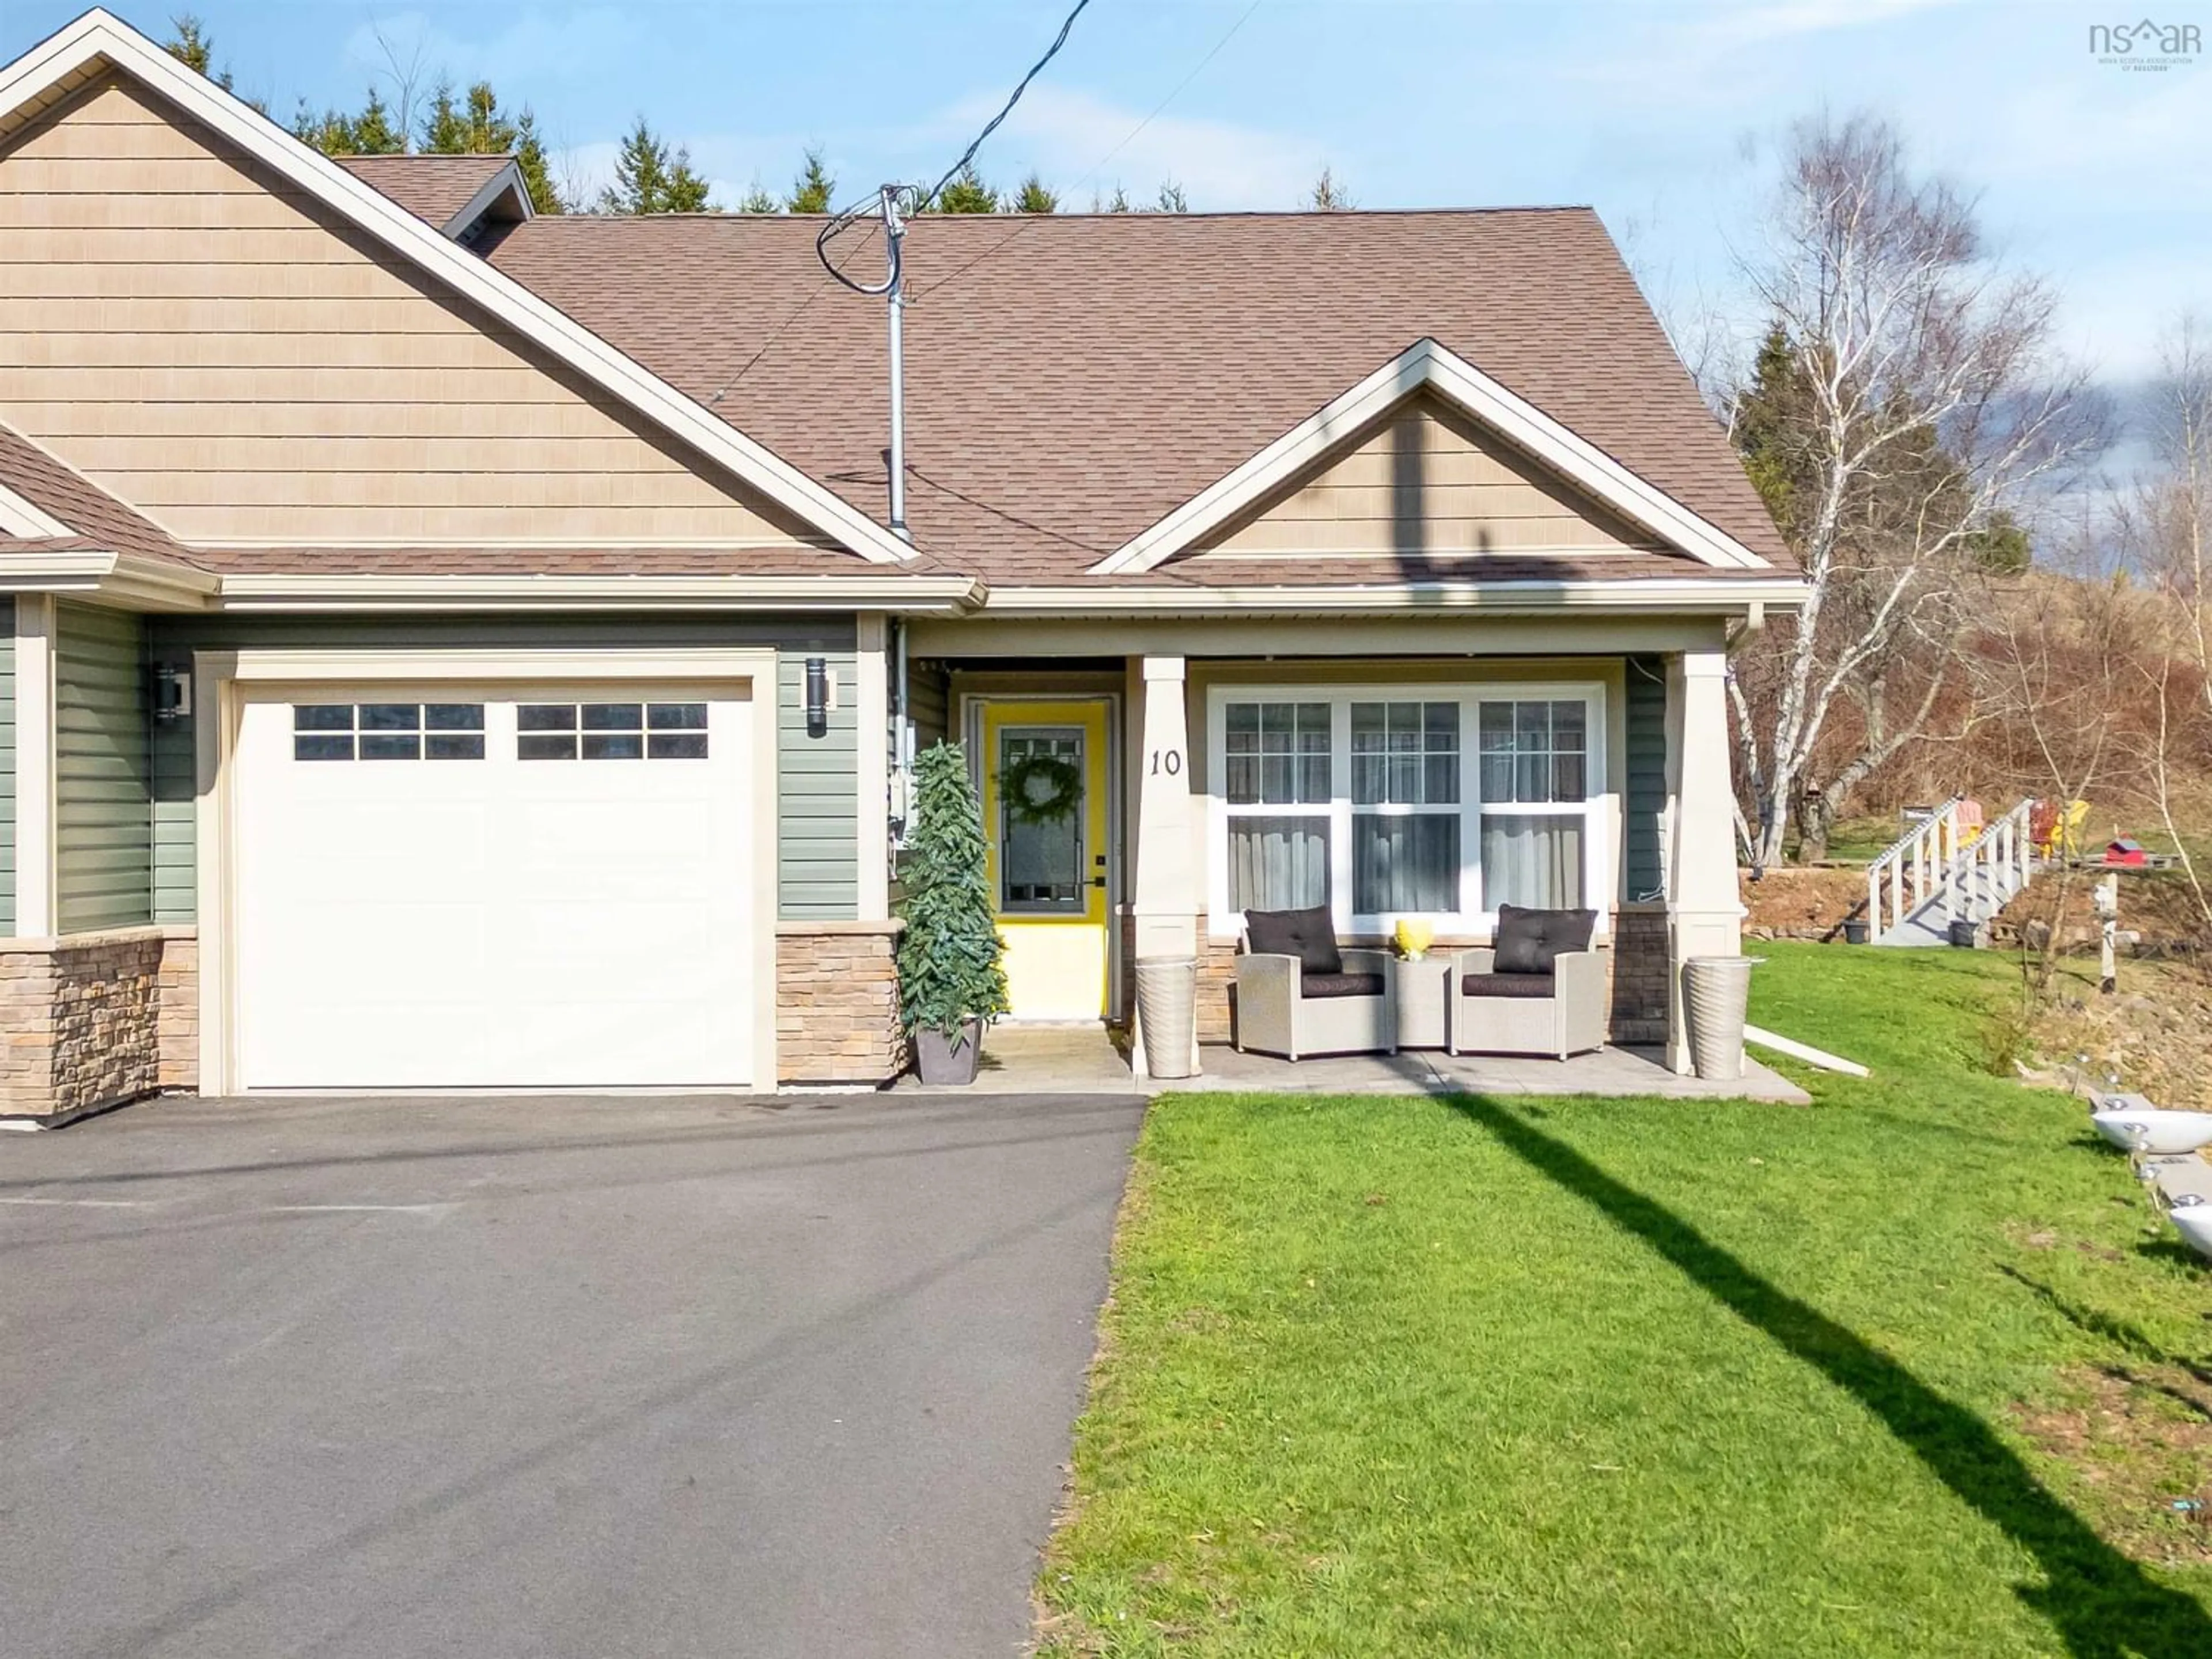 Home with unknown exterior material for 10 Edward Dr, Garlands Crossing Nova Scotia B0N 2T0